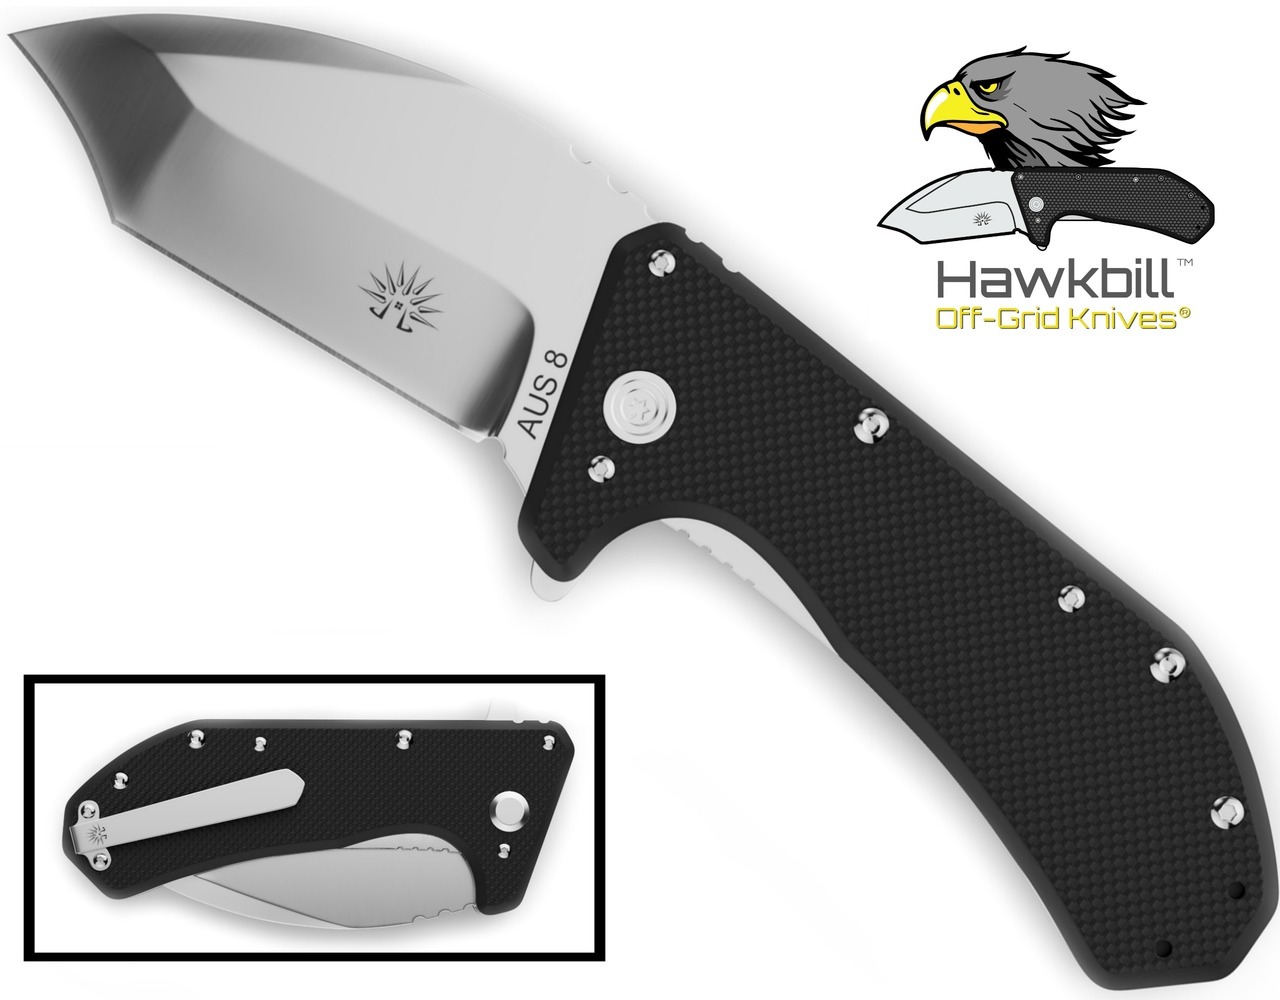 Advantages and Disadvantages of a Hawkbill Knife - Off-Grid Knives